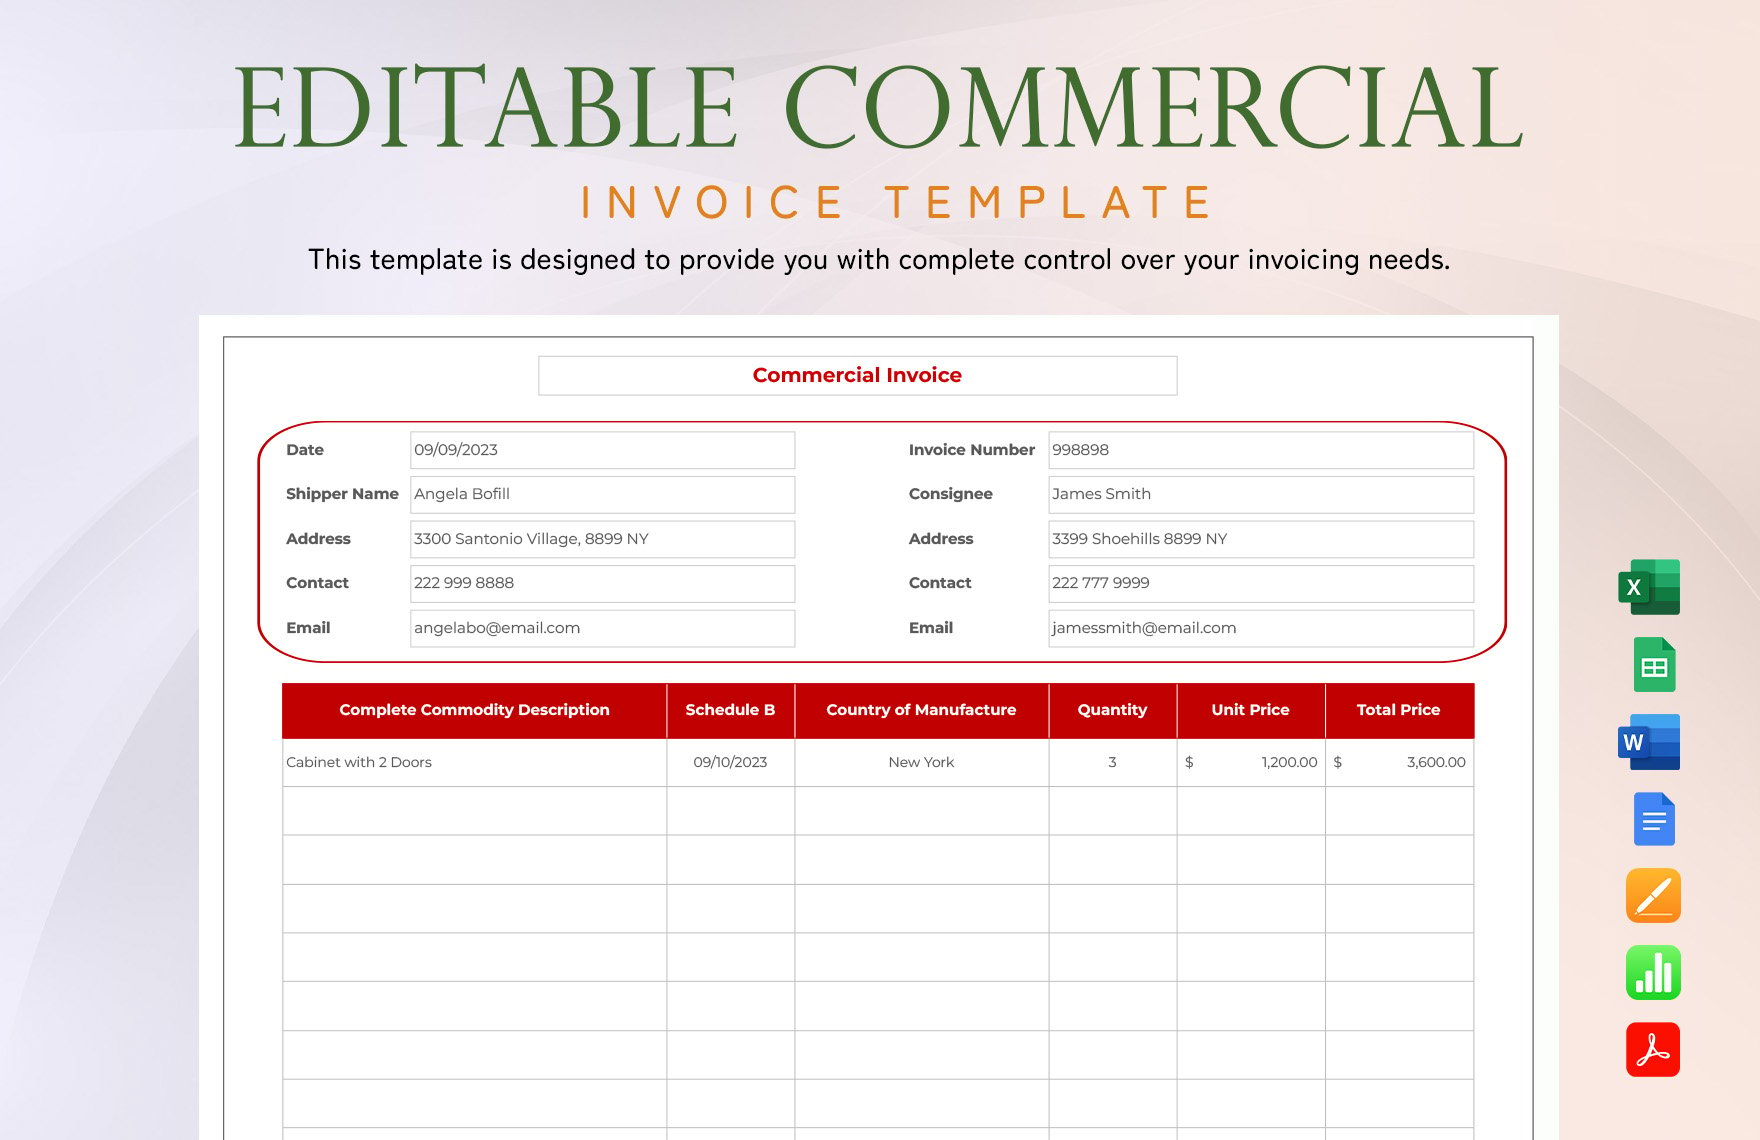 Free Editable Commercial Invoice Template in Word, Excel, PDF, Google Sheets, Apple Pages, Apple Numbers